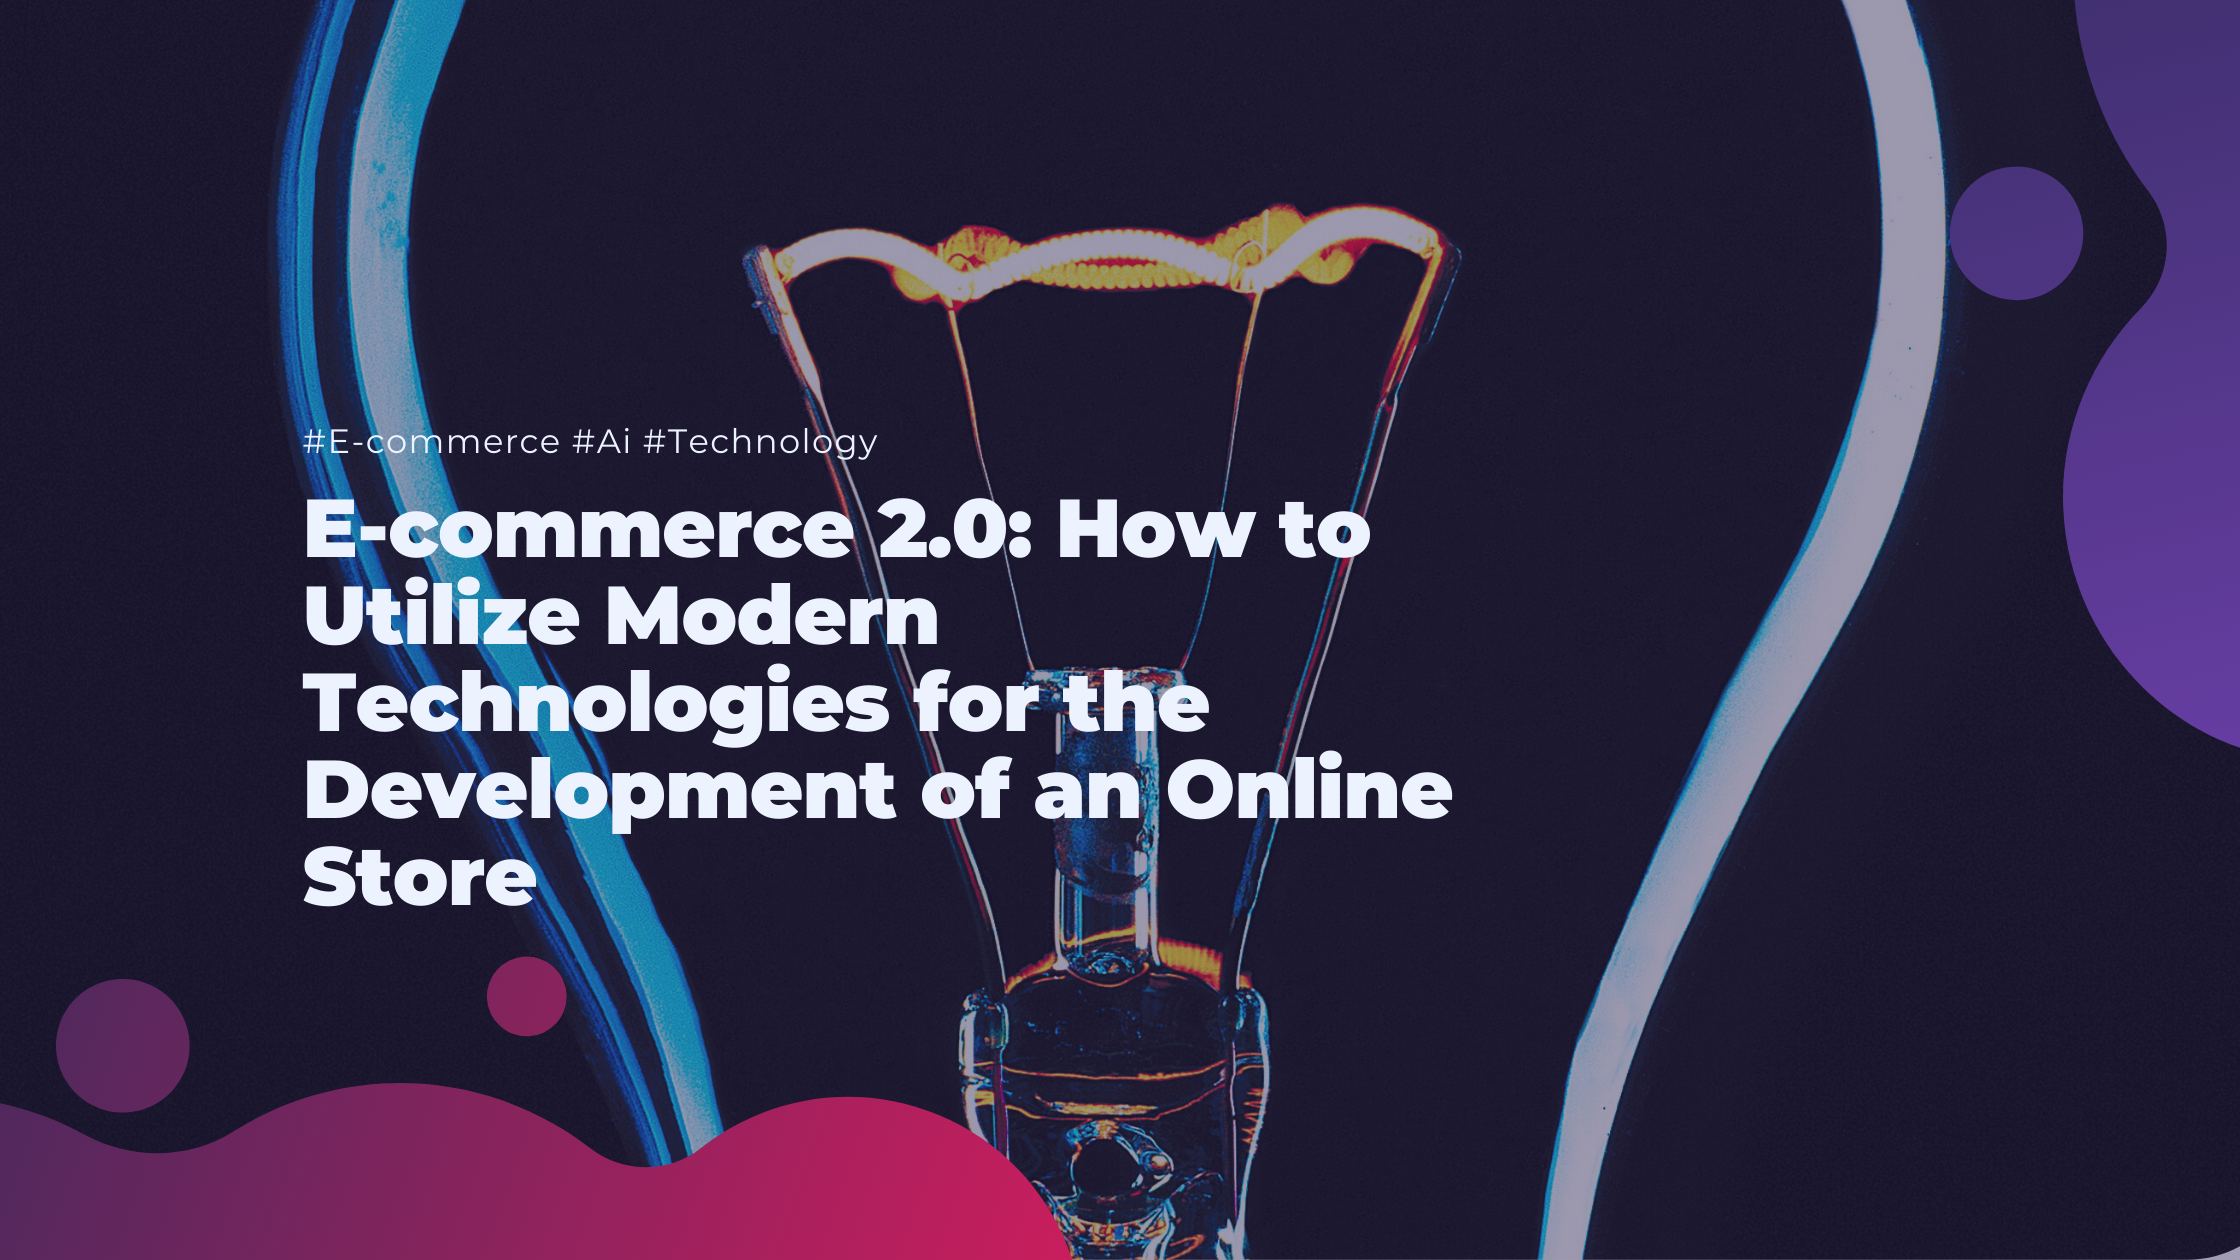 E-commerce 2.0: How to Utilize Modern Technologies for the Development of an Online Store